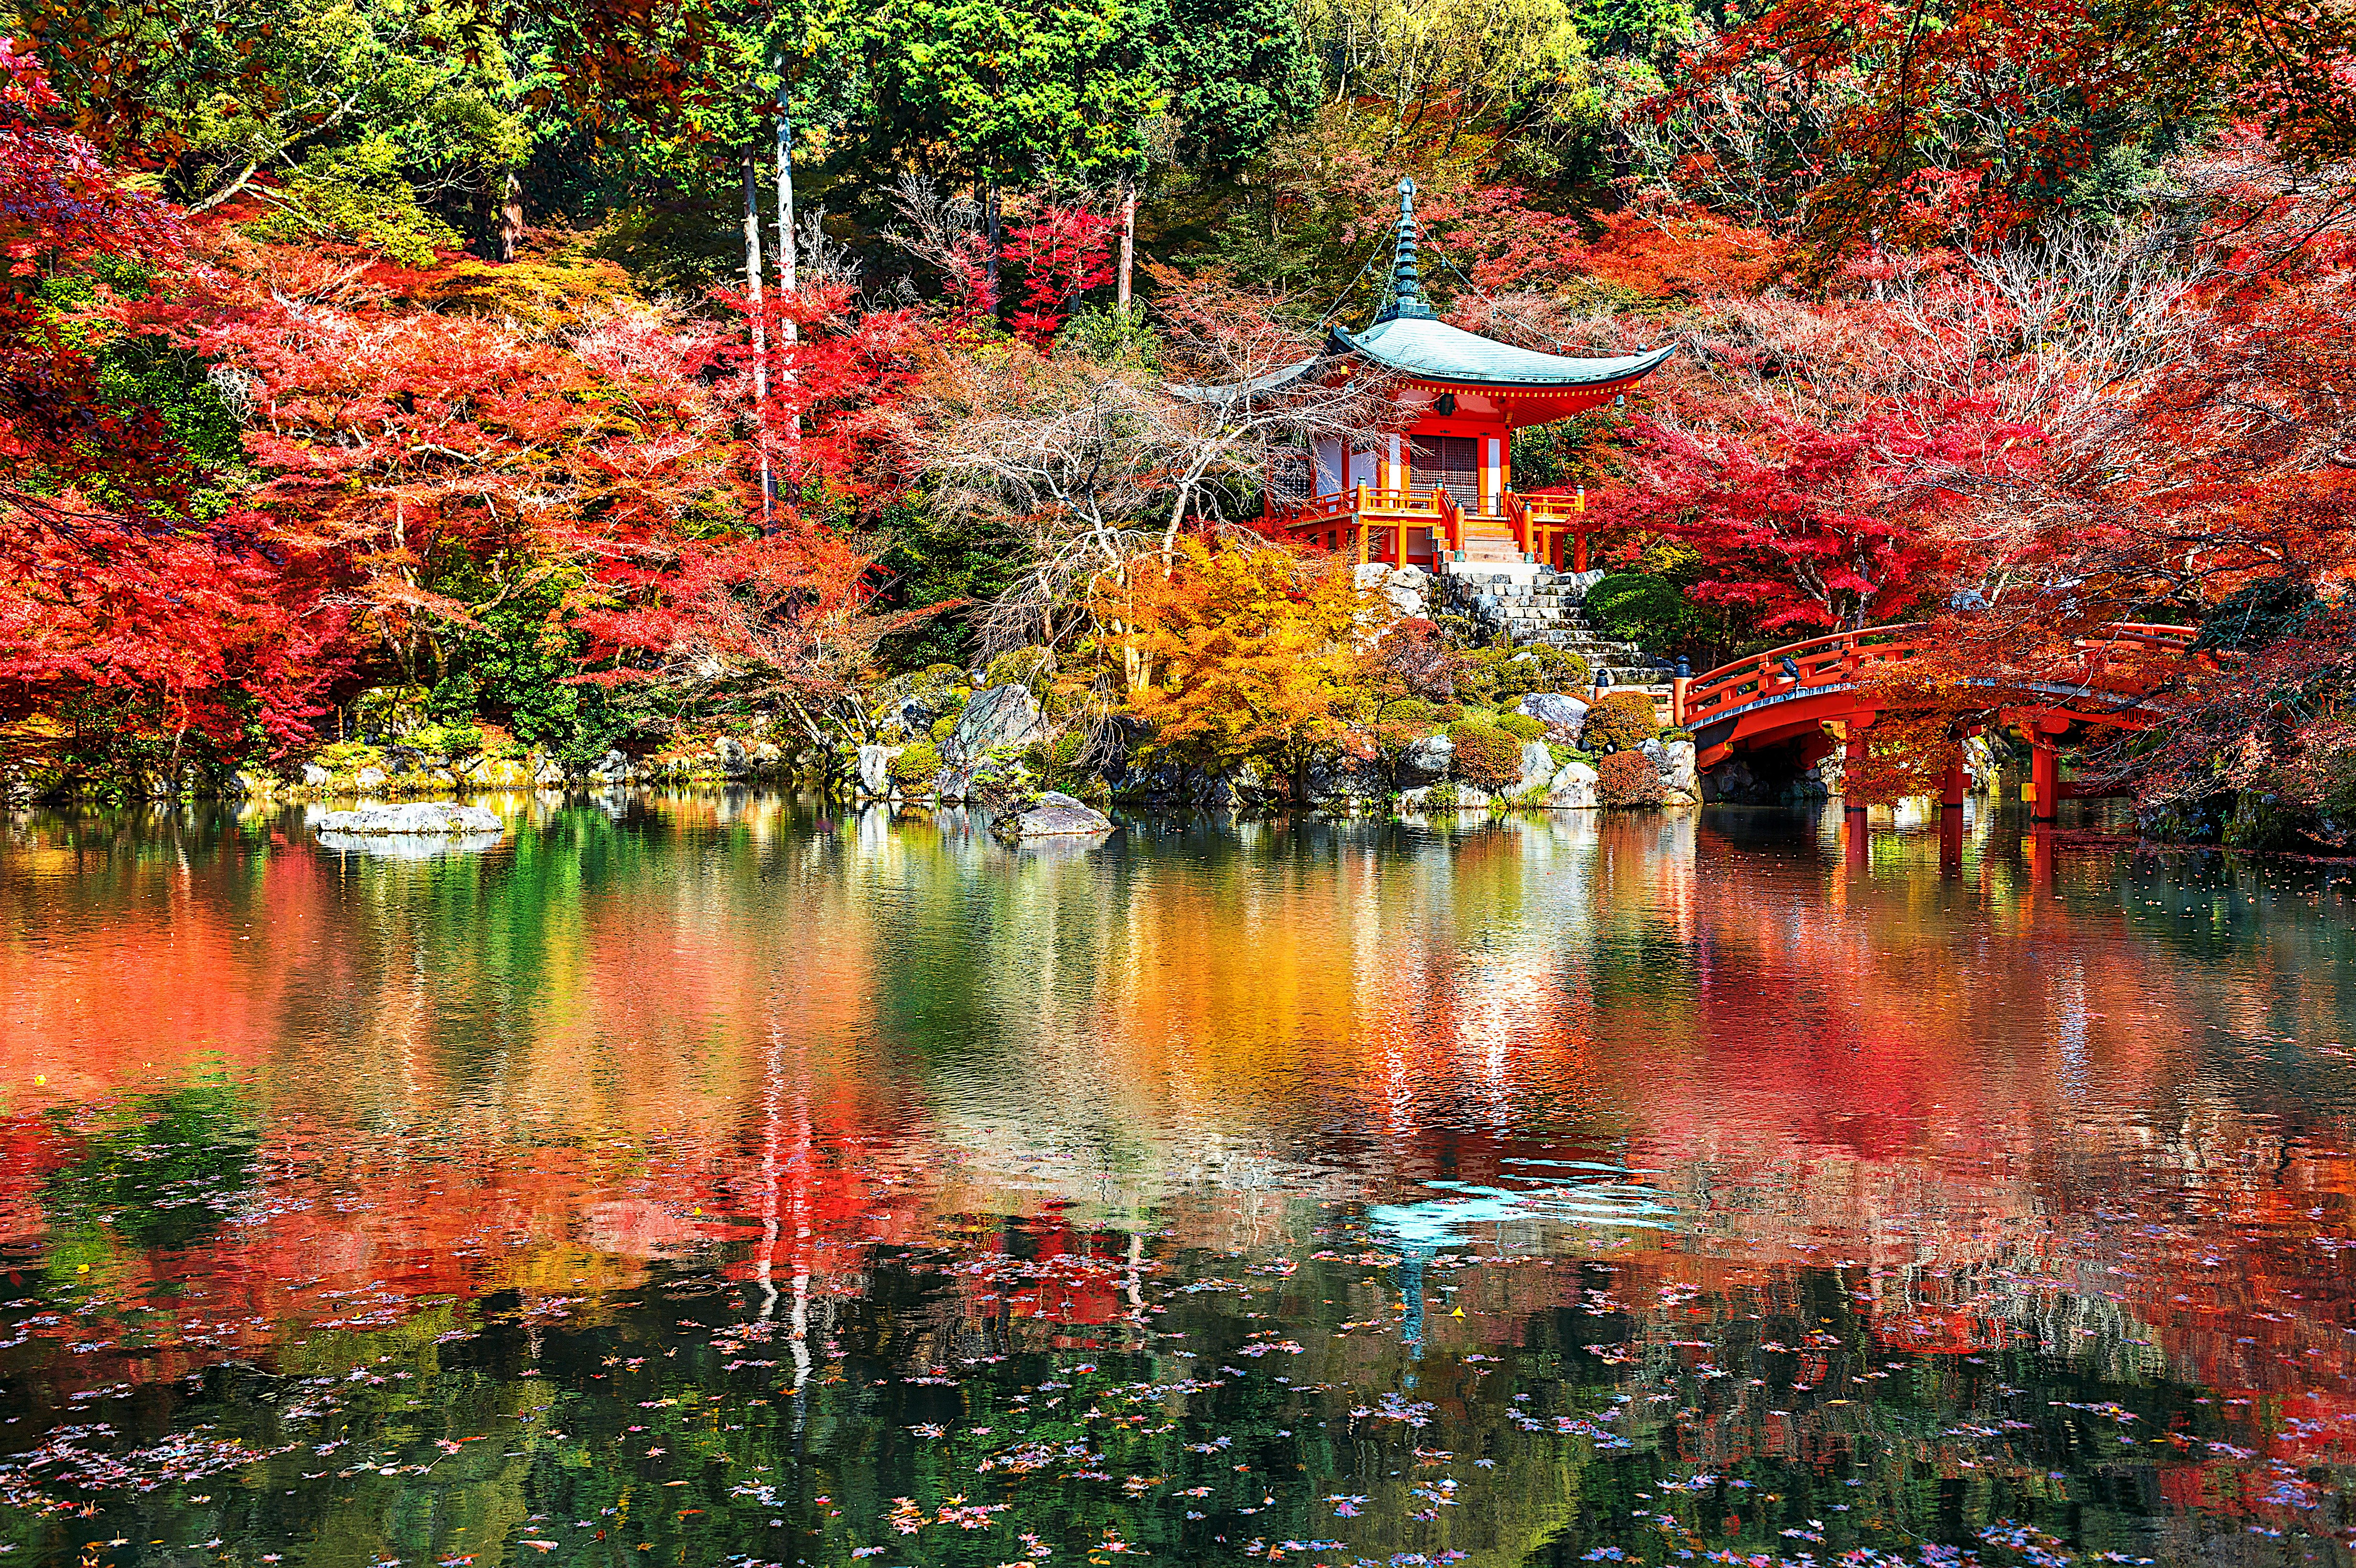 Free photo A pond with a red bridge in Japan